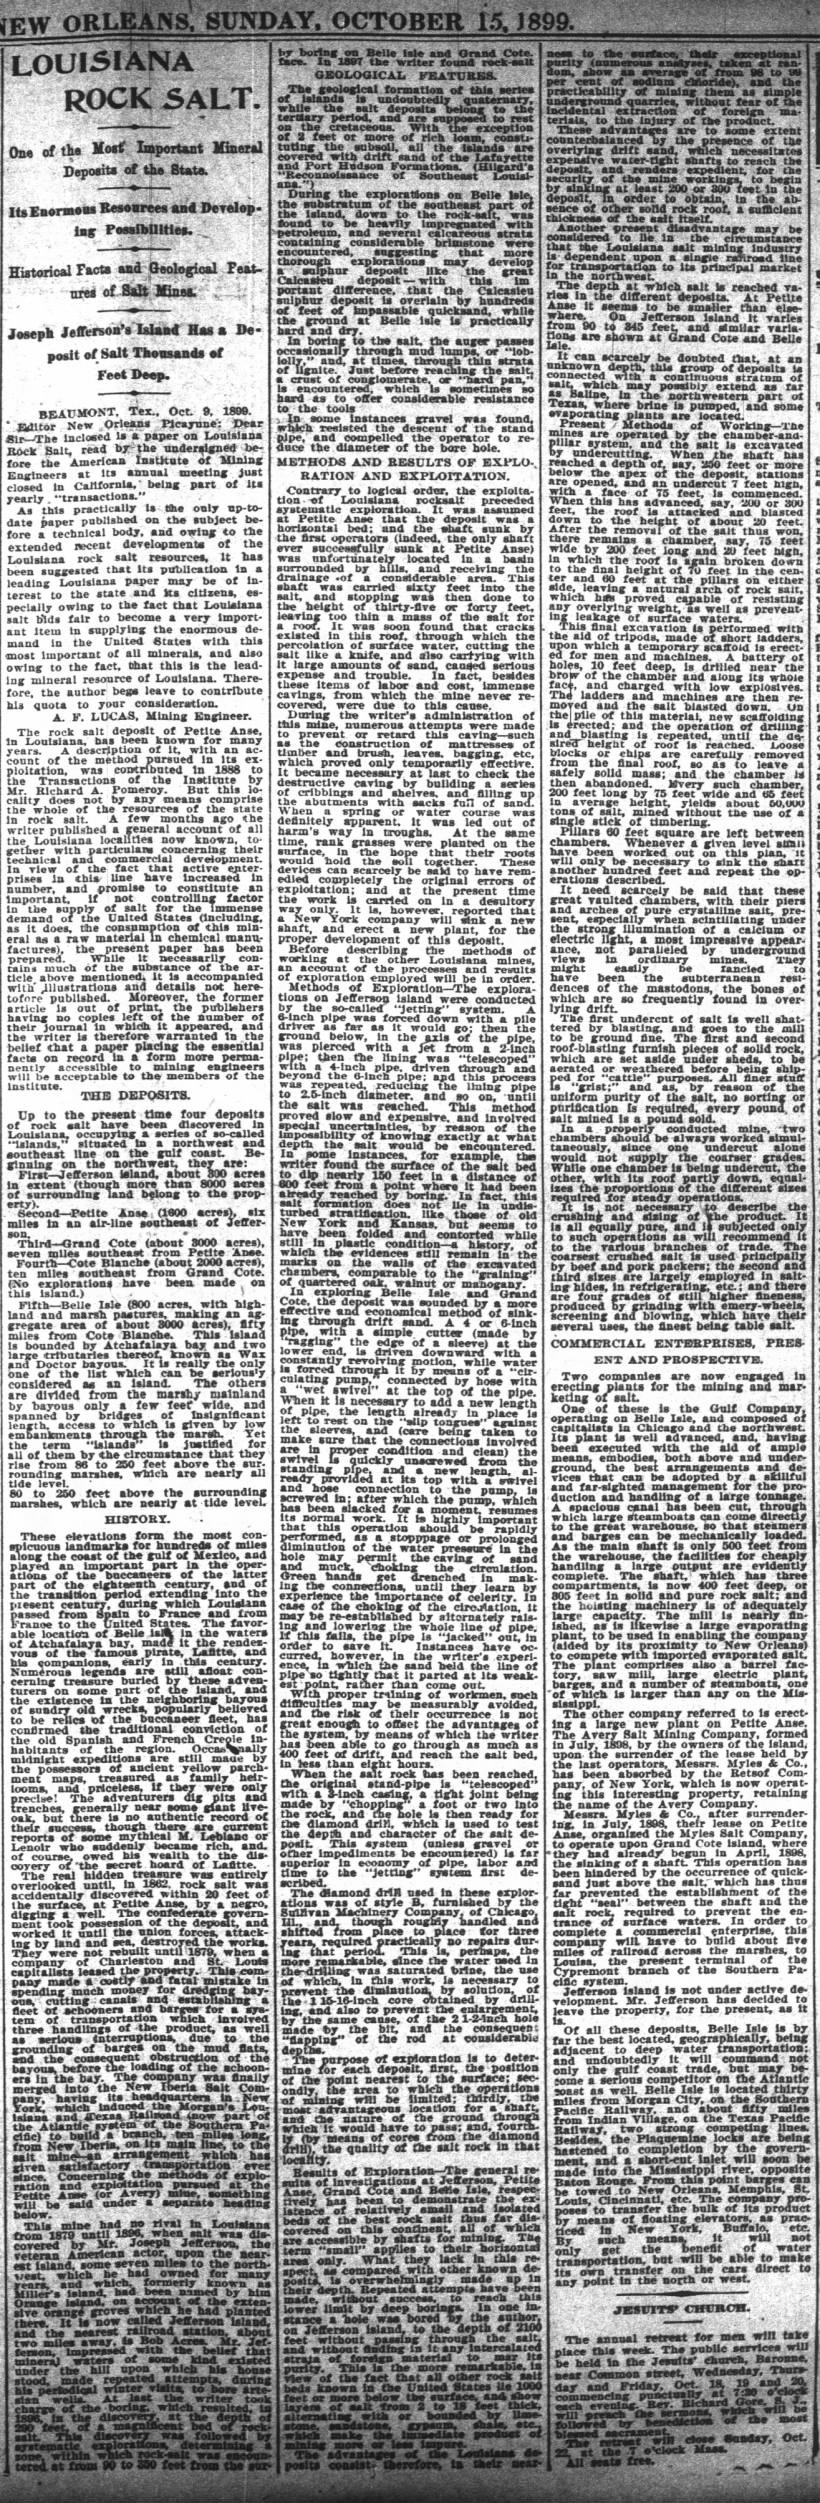 The Times-Picayune (New Orleans) Oct. 15, 1899